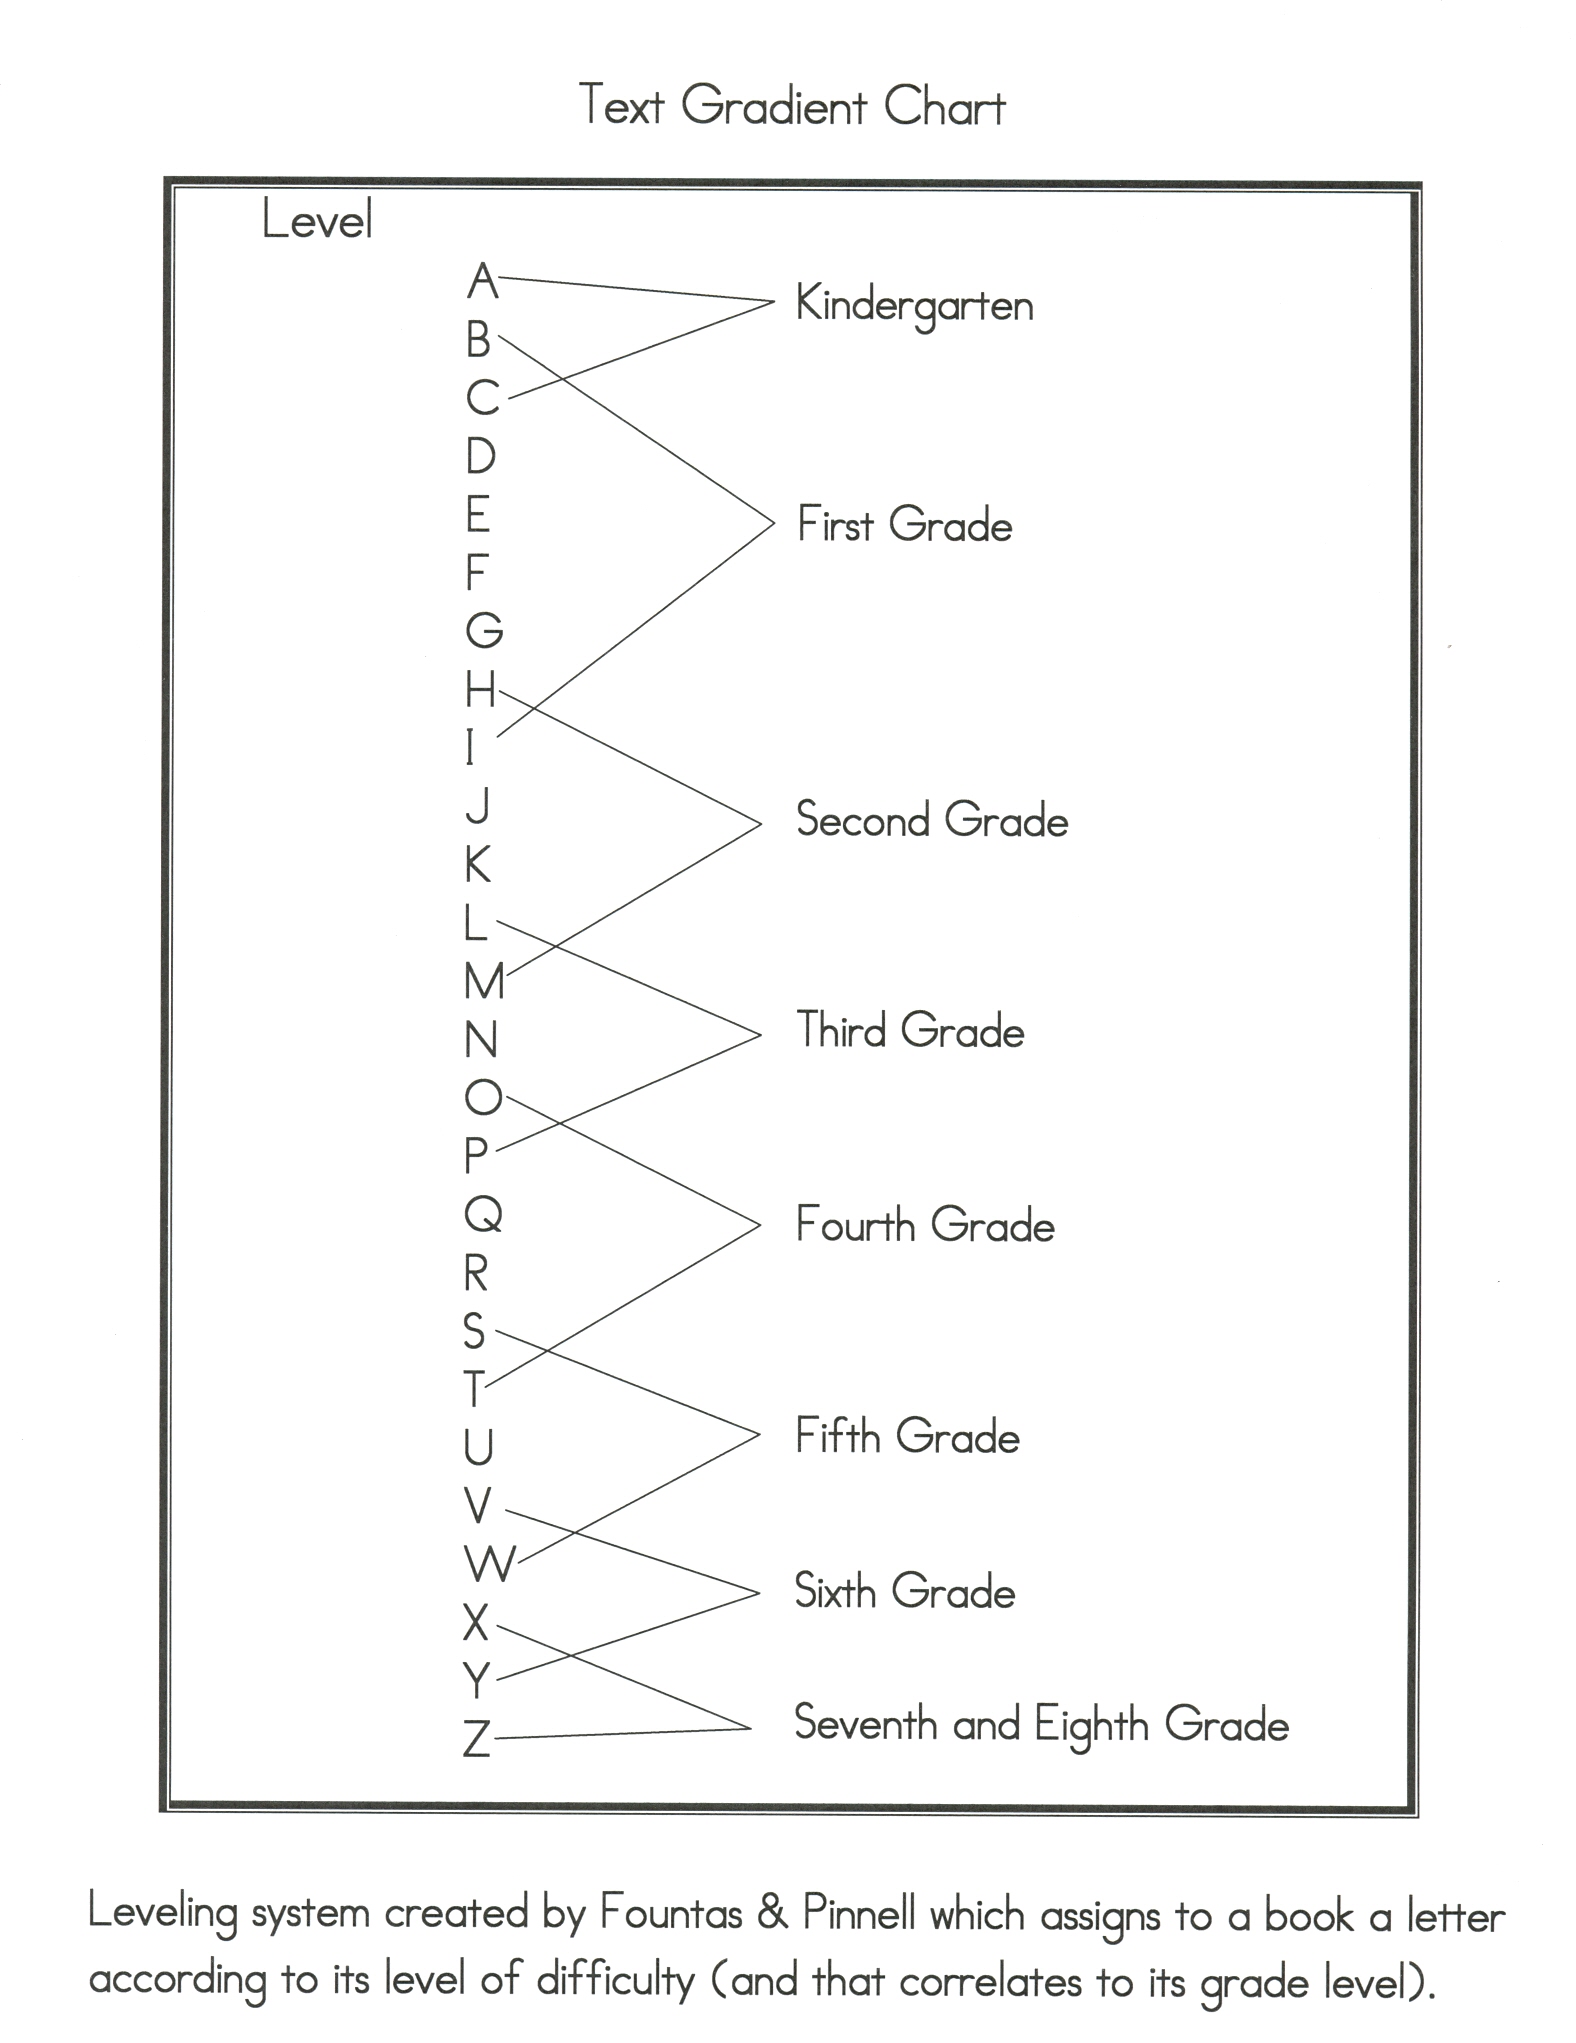 Text Gradient Chart for Independent Reading Levels